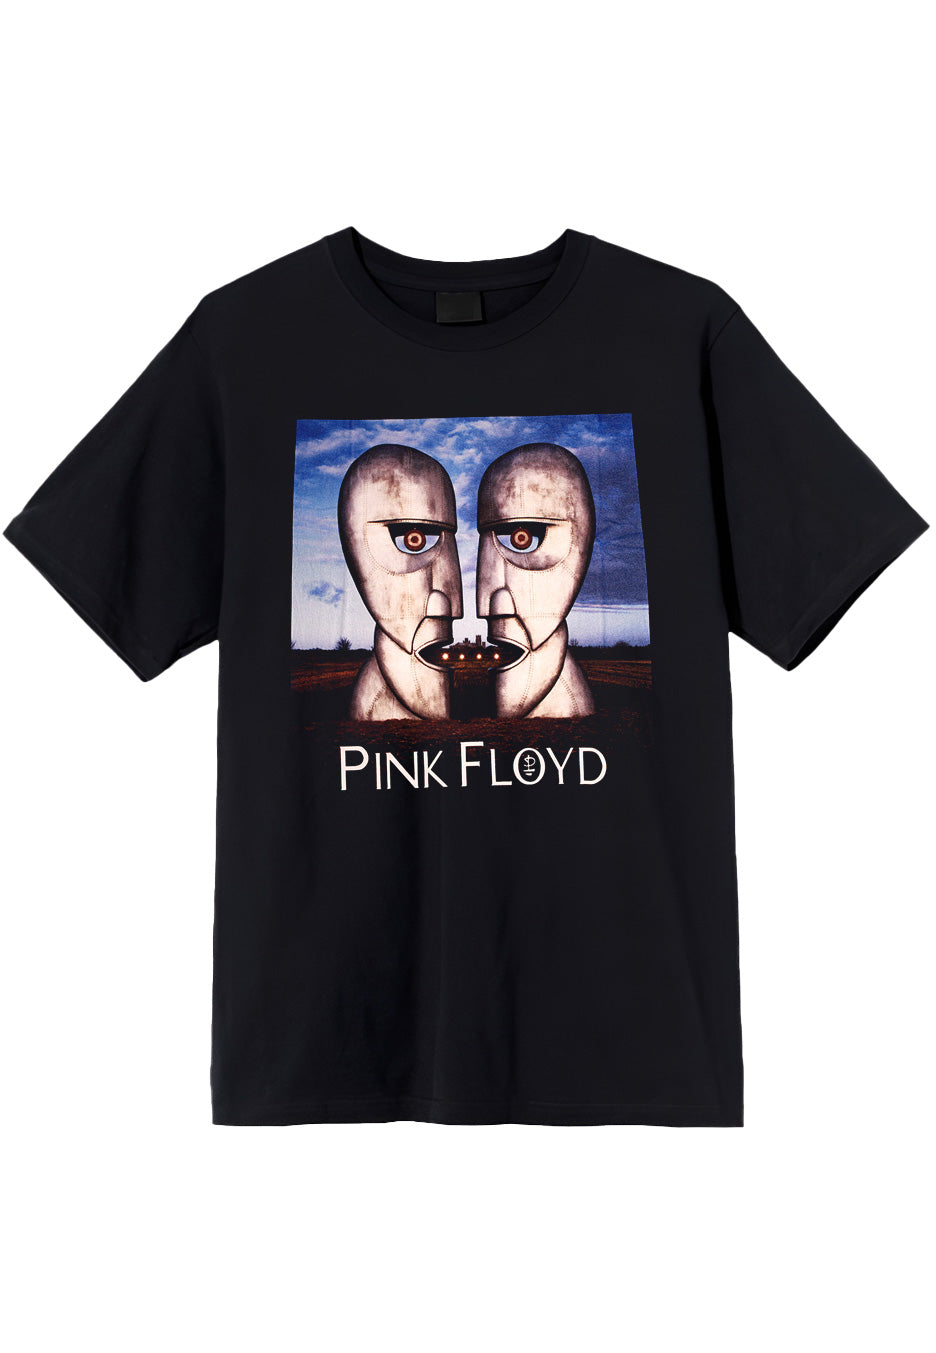 Pink Floyd - The Division Bell - T-Shirt